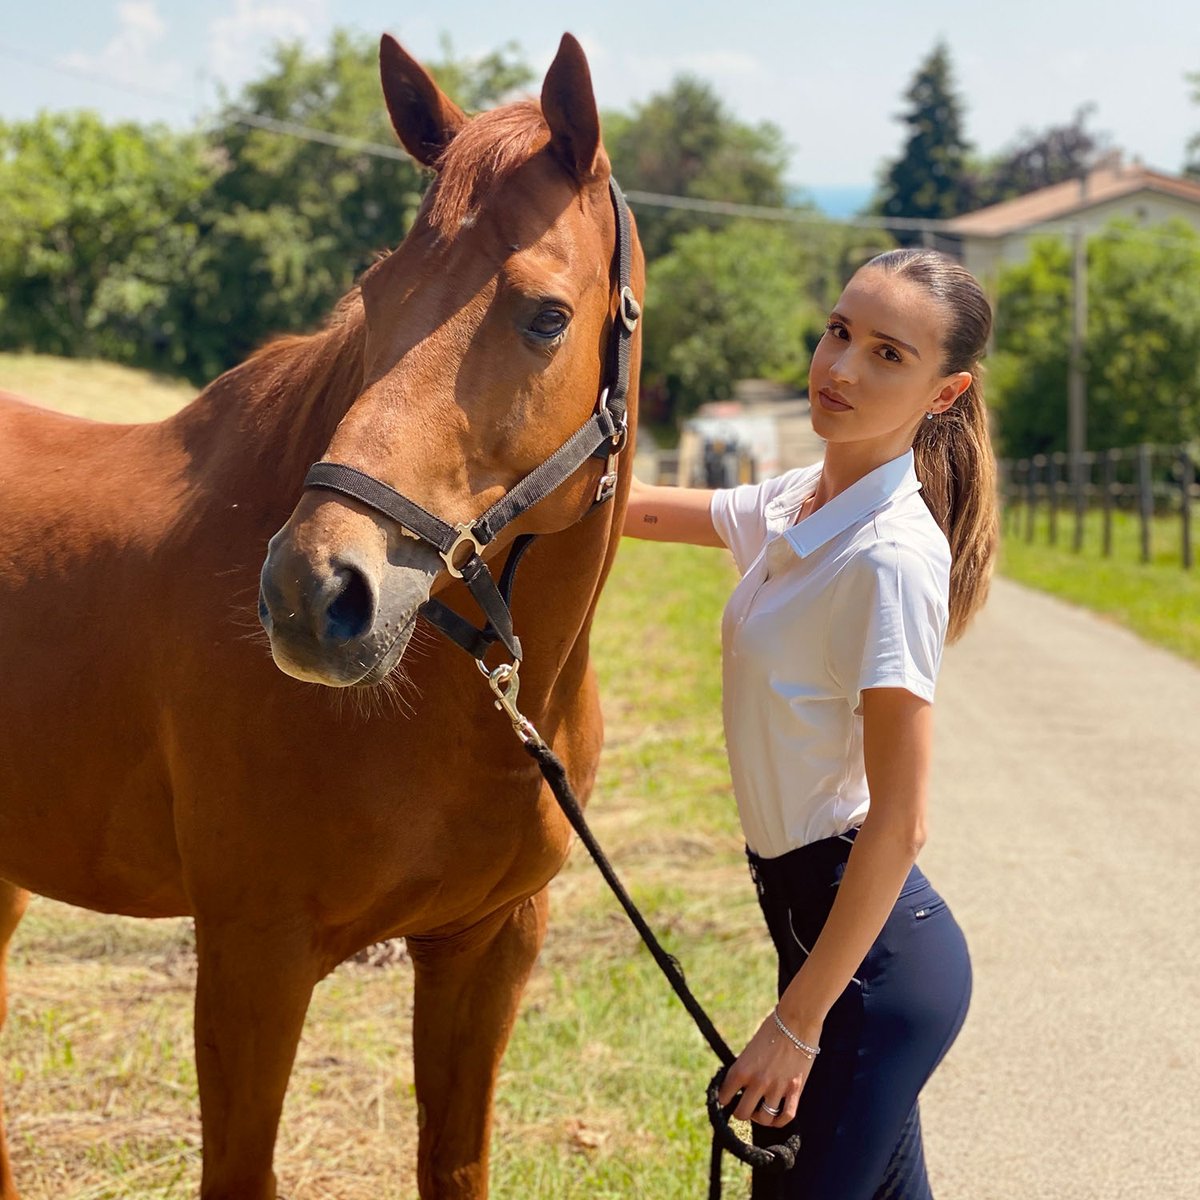 Women's Polo Shirts 🥰 @baroni_claudia

Get the polo link from the comment!

#womenpolo #womentshirts #activelifestyle #magcomsen